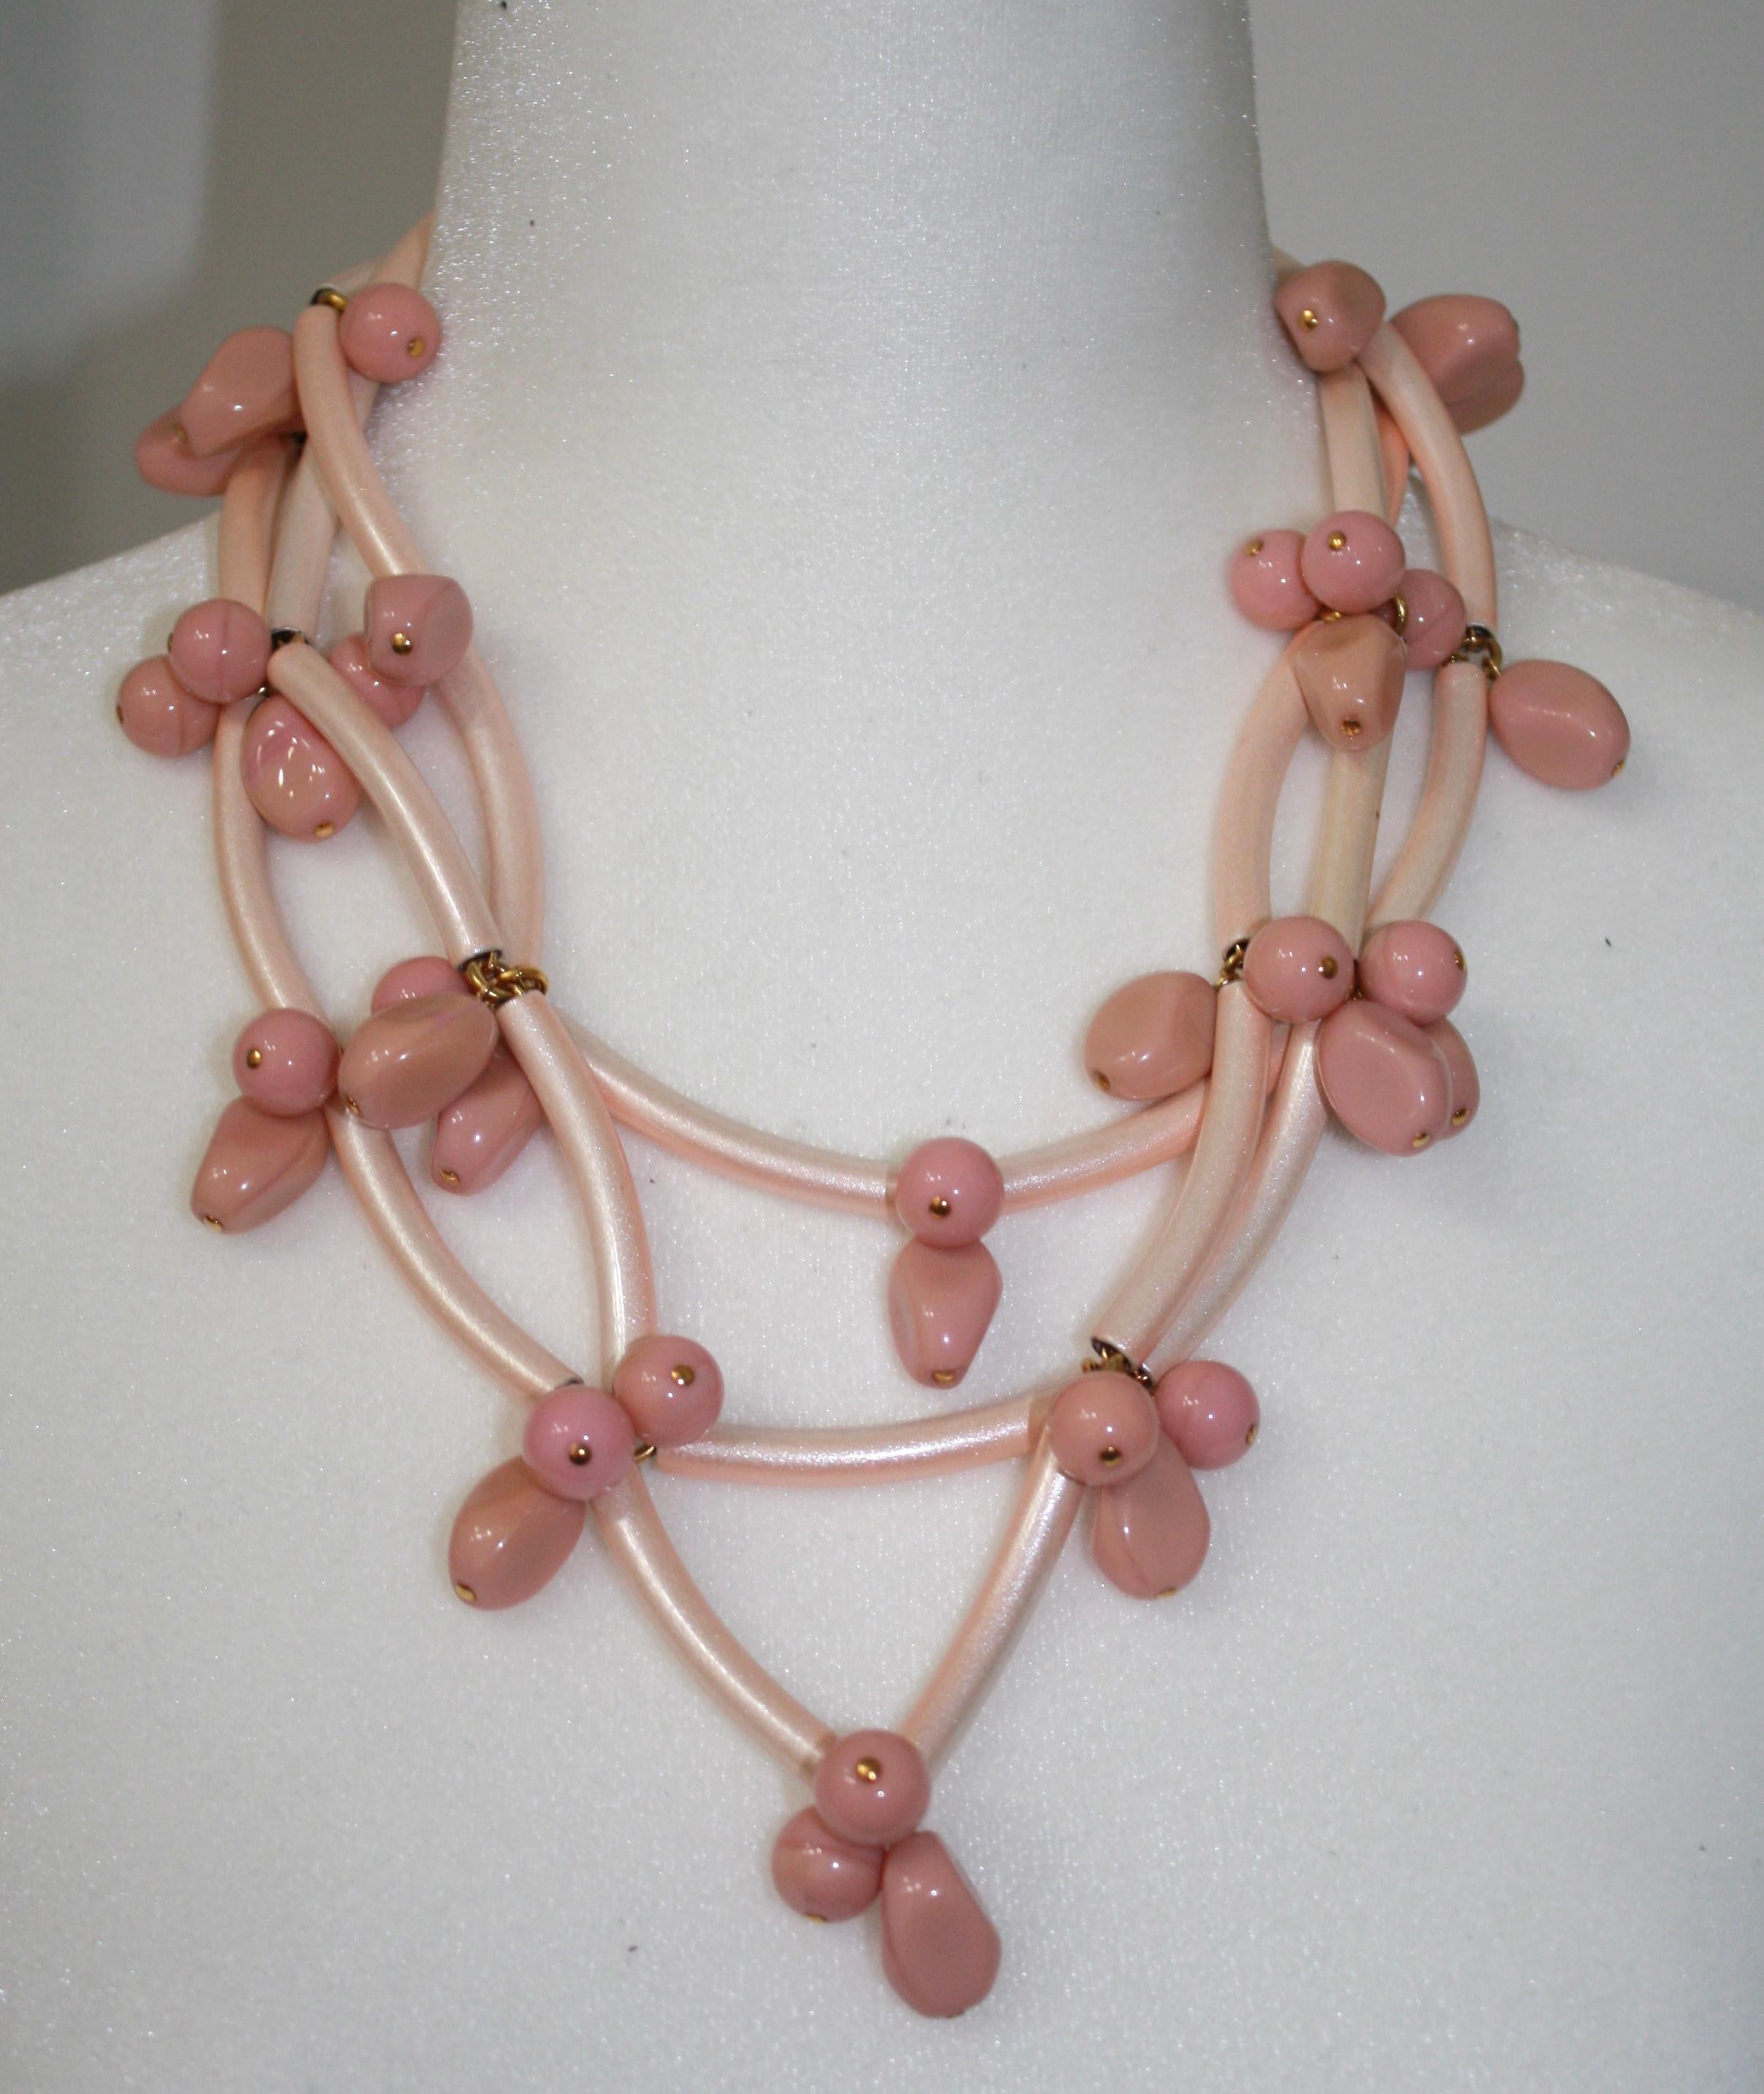 Blush color metallic tubes intertwined with handmade glass beads. Iconic design made in Paris.